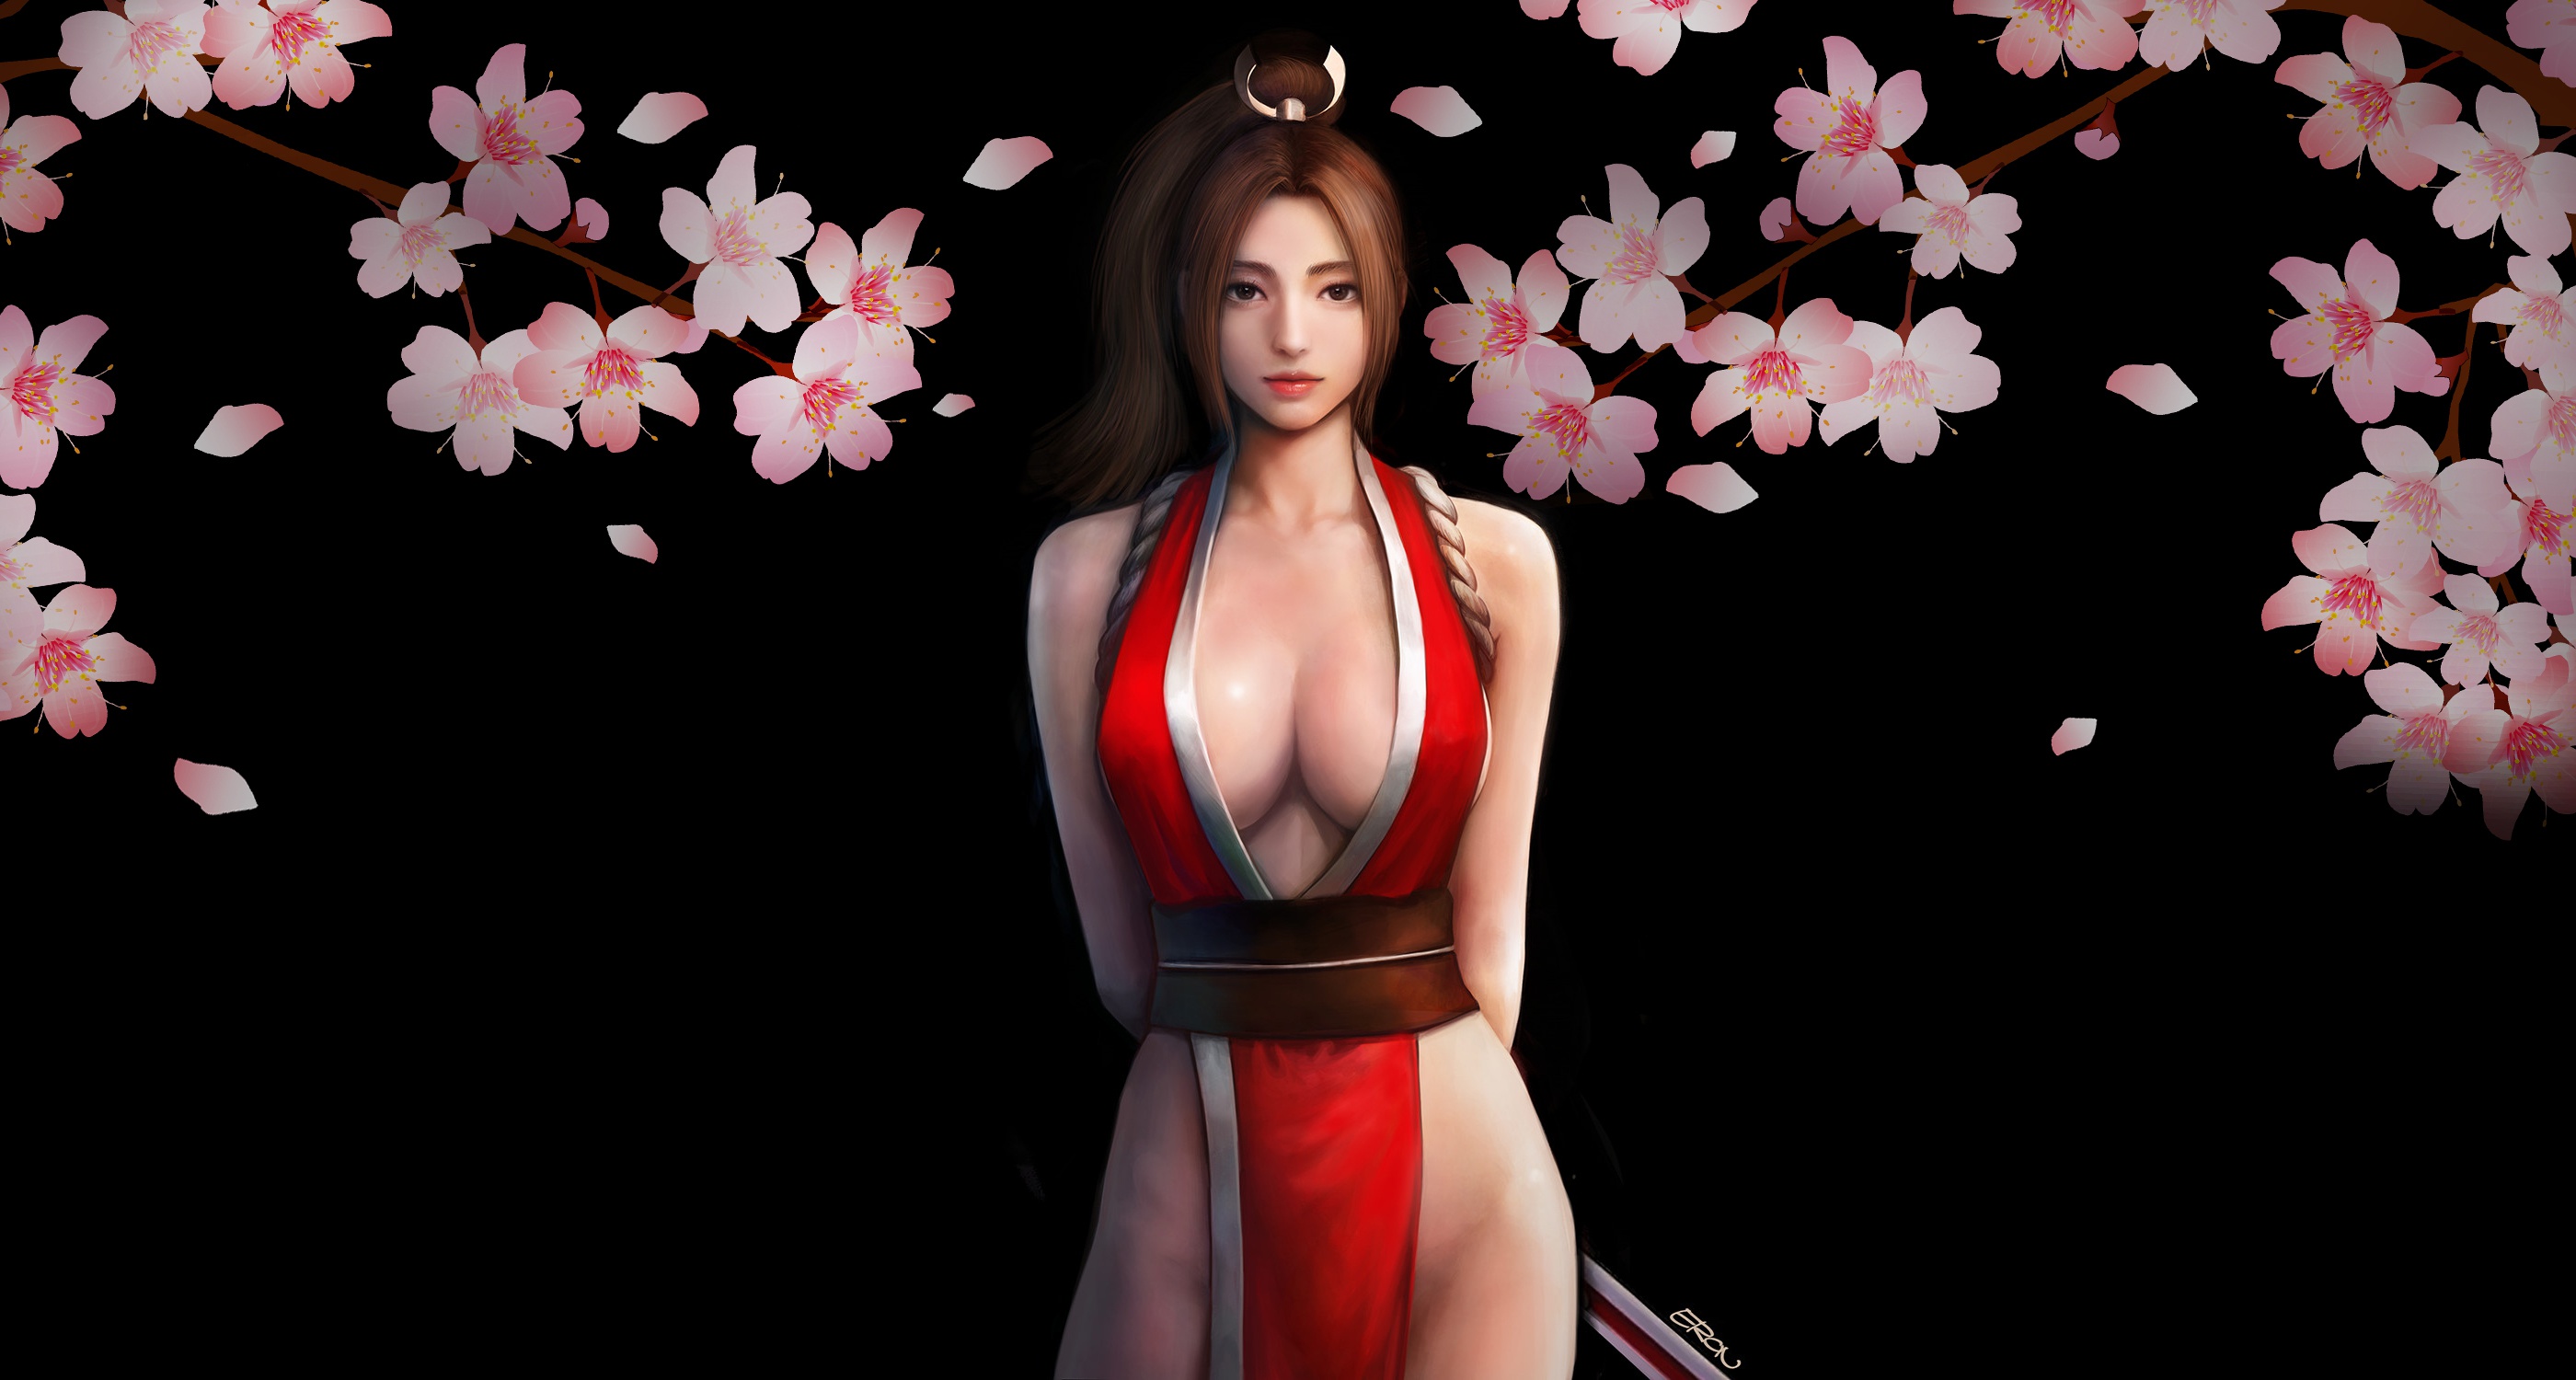 Anime 2800x1500 anime girls anime big boobs cleavage fantasy art flowers fantasy girl Mai Shiranui King of Fighters Fatal Fury boobs video games plants simple background black background